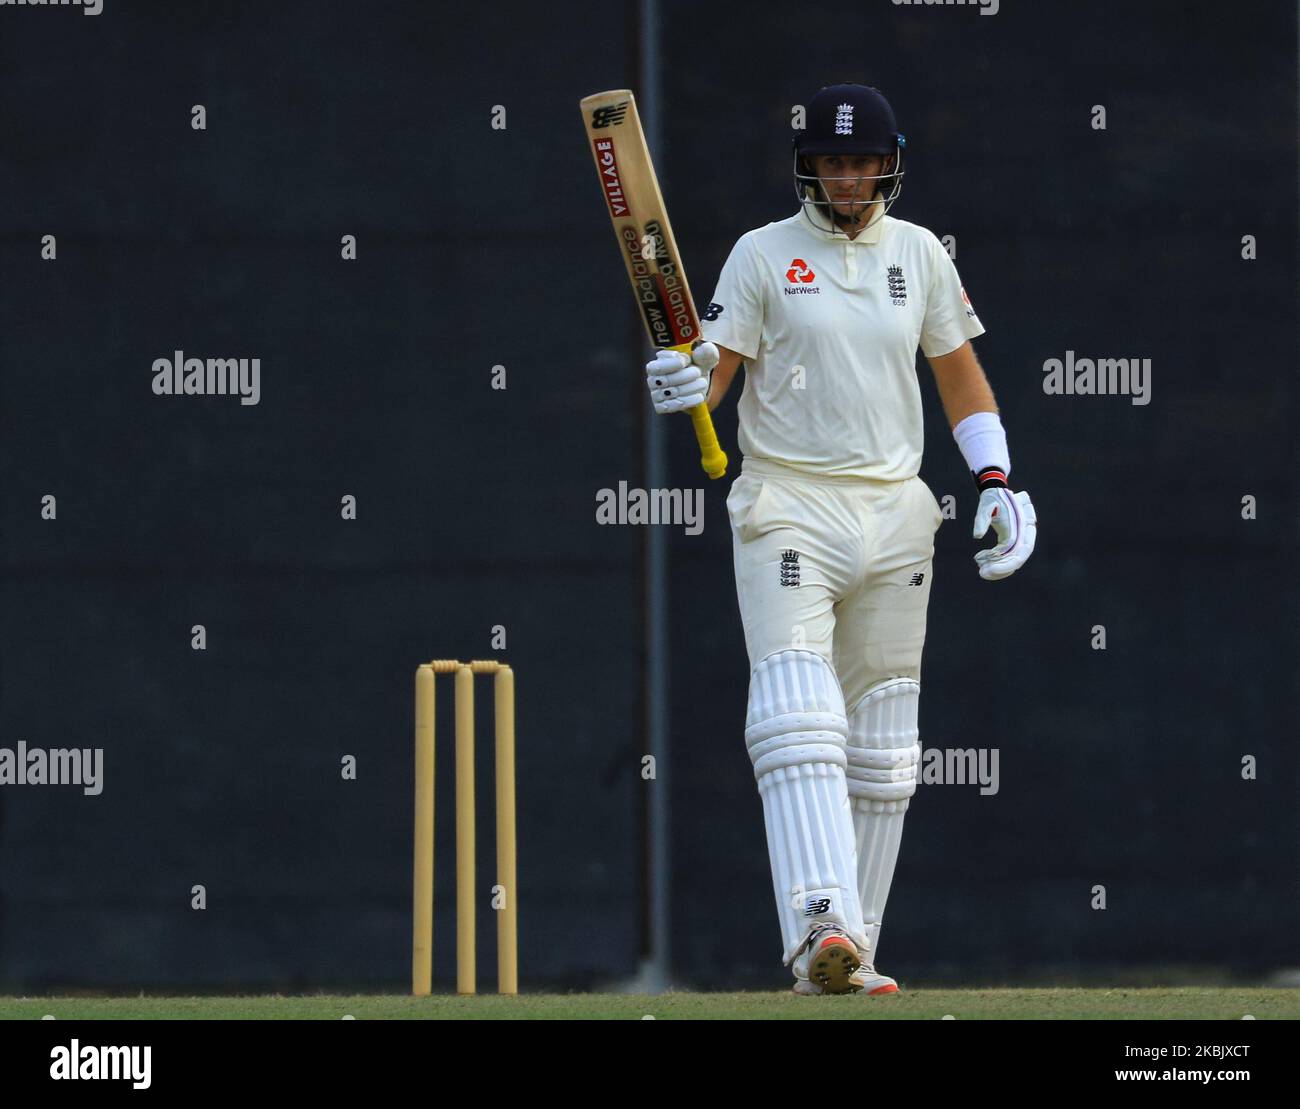 England cricket captain Joe Root celebrates after scoring 100 runs during the second day of the 2nd Warm up cricket match between Sri Lanka's Board President's XI and England at P Sara Oval on March 13, 2020 in Colombo, Sri Lanka (Photo by Tharaka Basnayaka/NurPhoto) Stock Photo